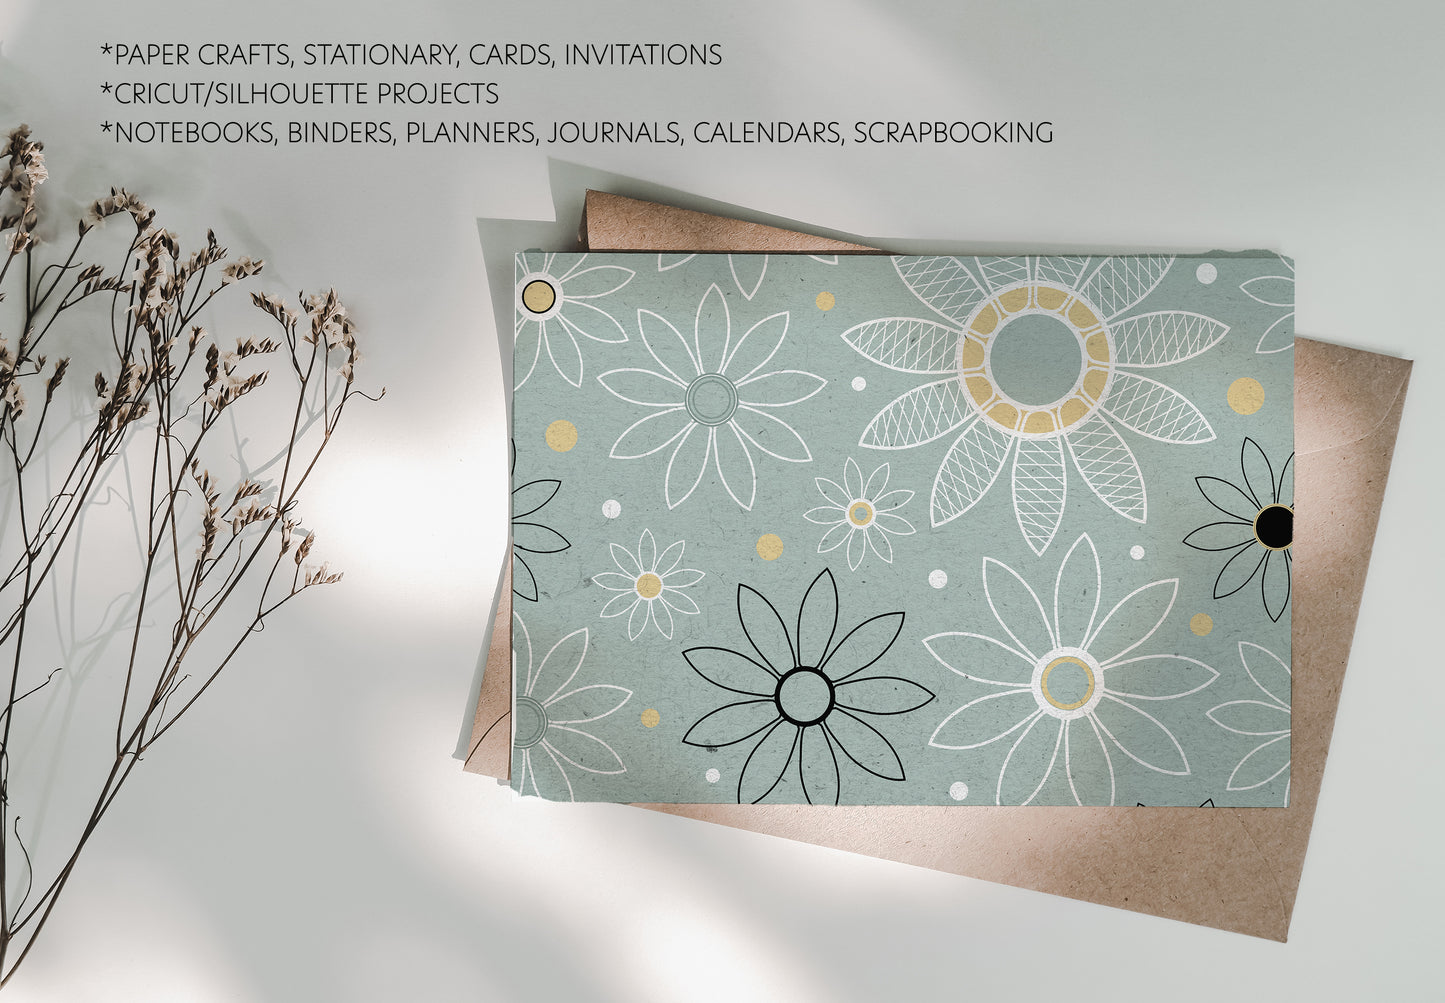 Daisies for Days - Seamless Vector Pattern Design